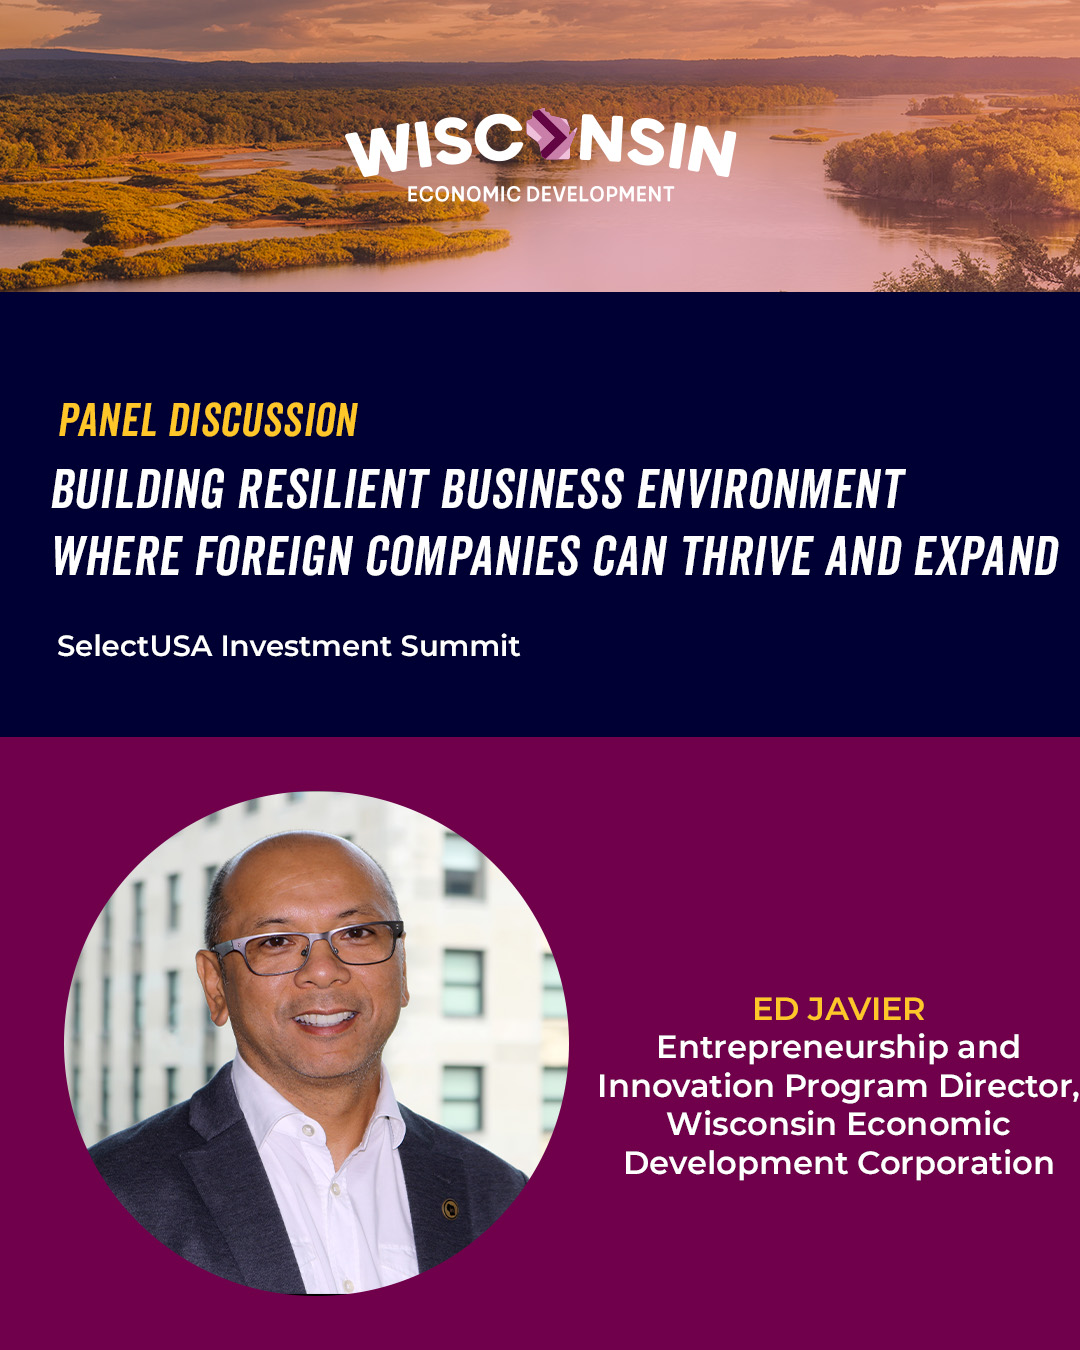 A graphic promoting a panel discussion at SelectUSA Investment Summit involving Ed Javier, Entrepreneurship and Innovation Program Director at WEDC.